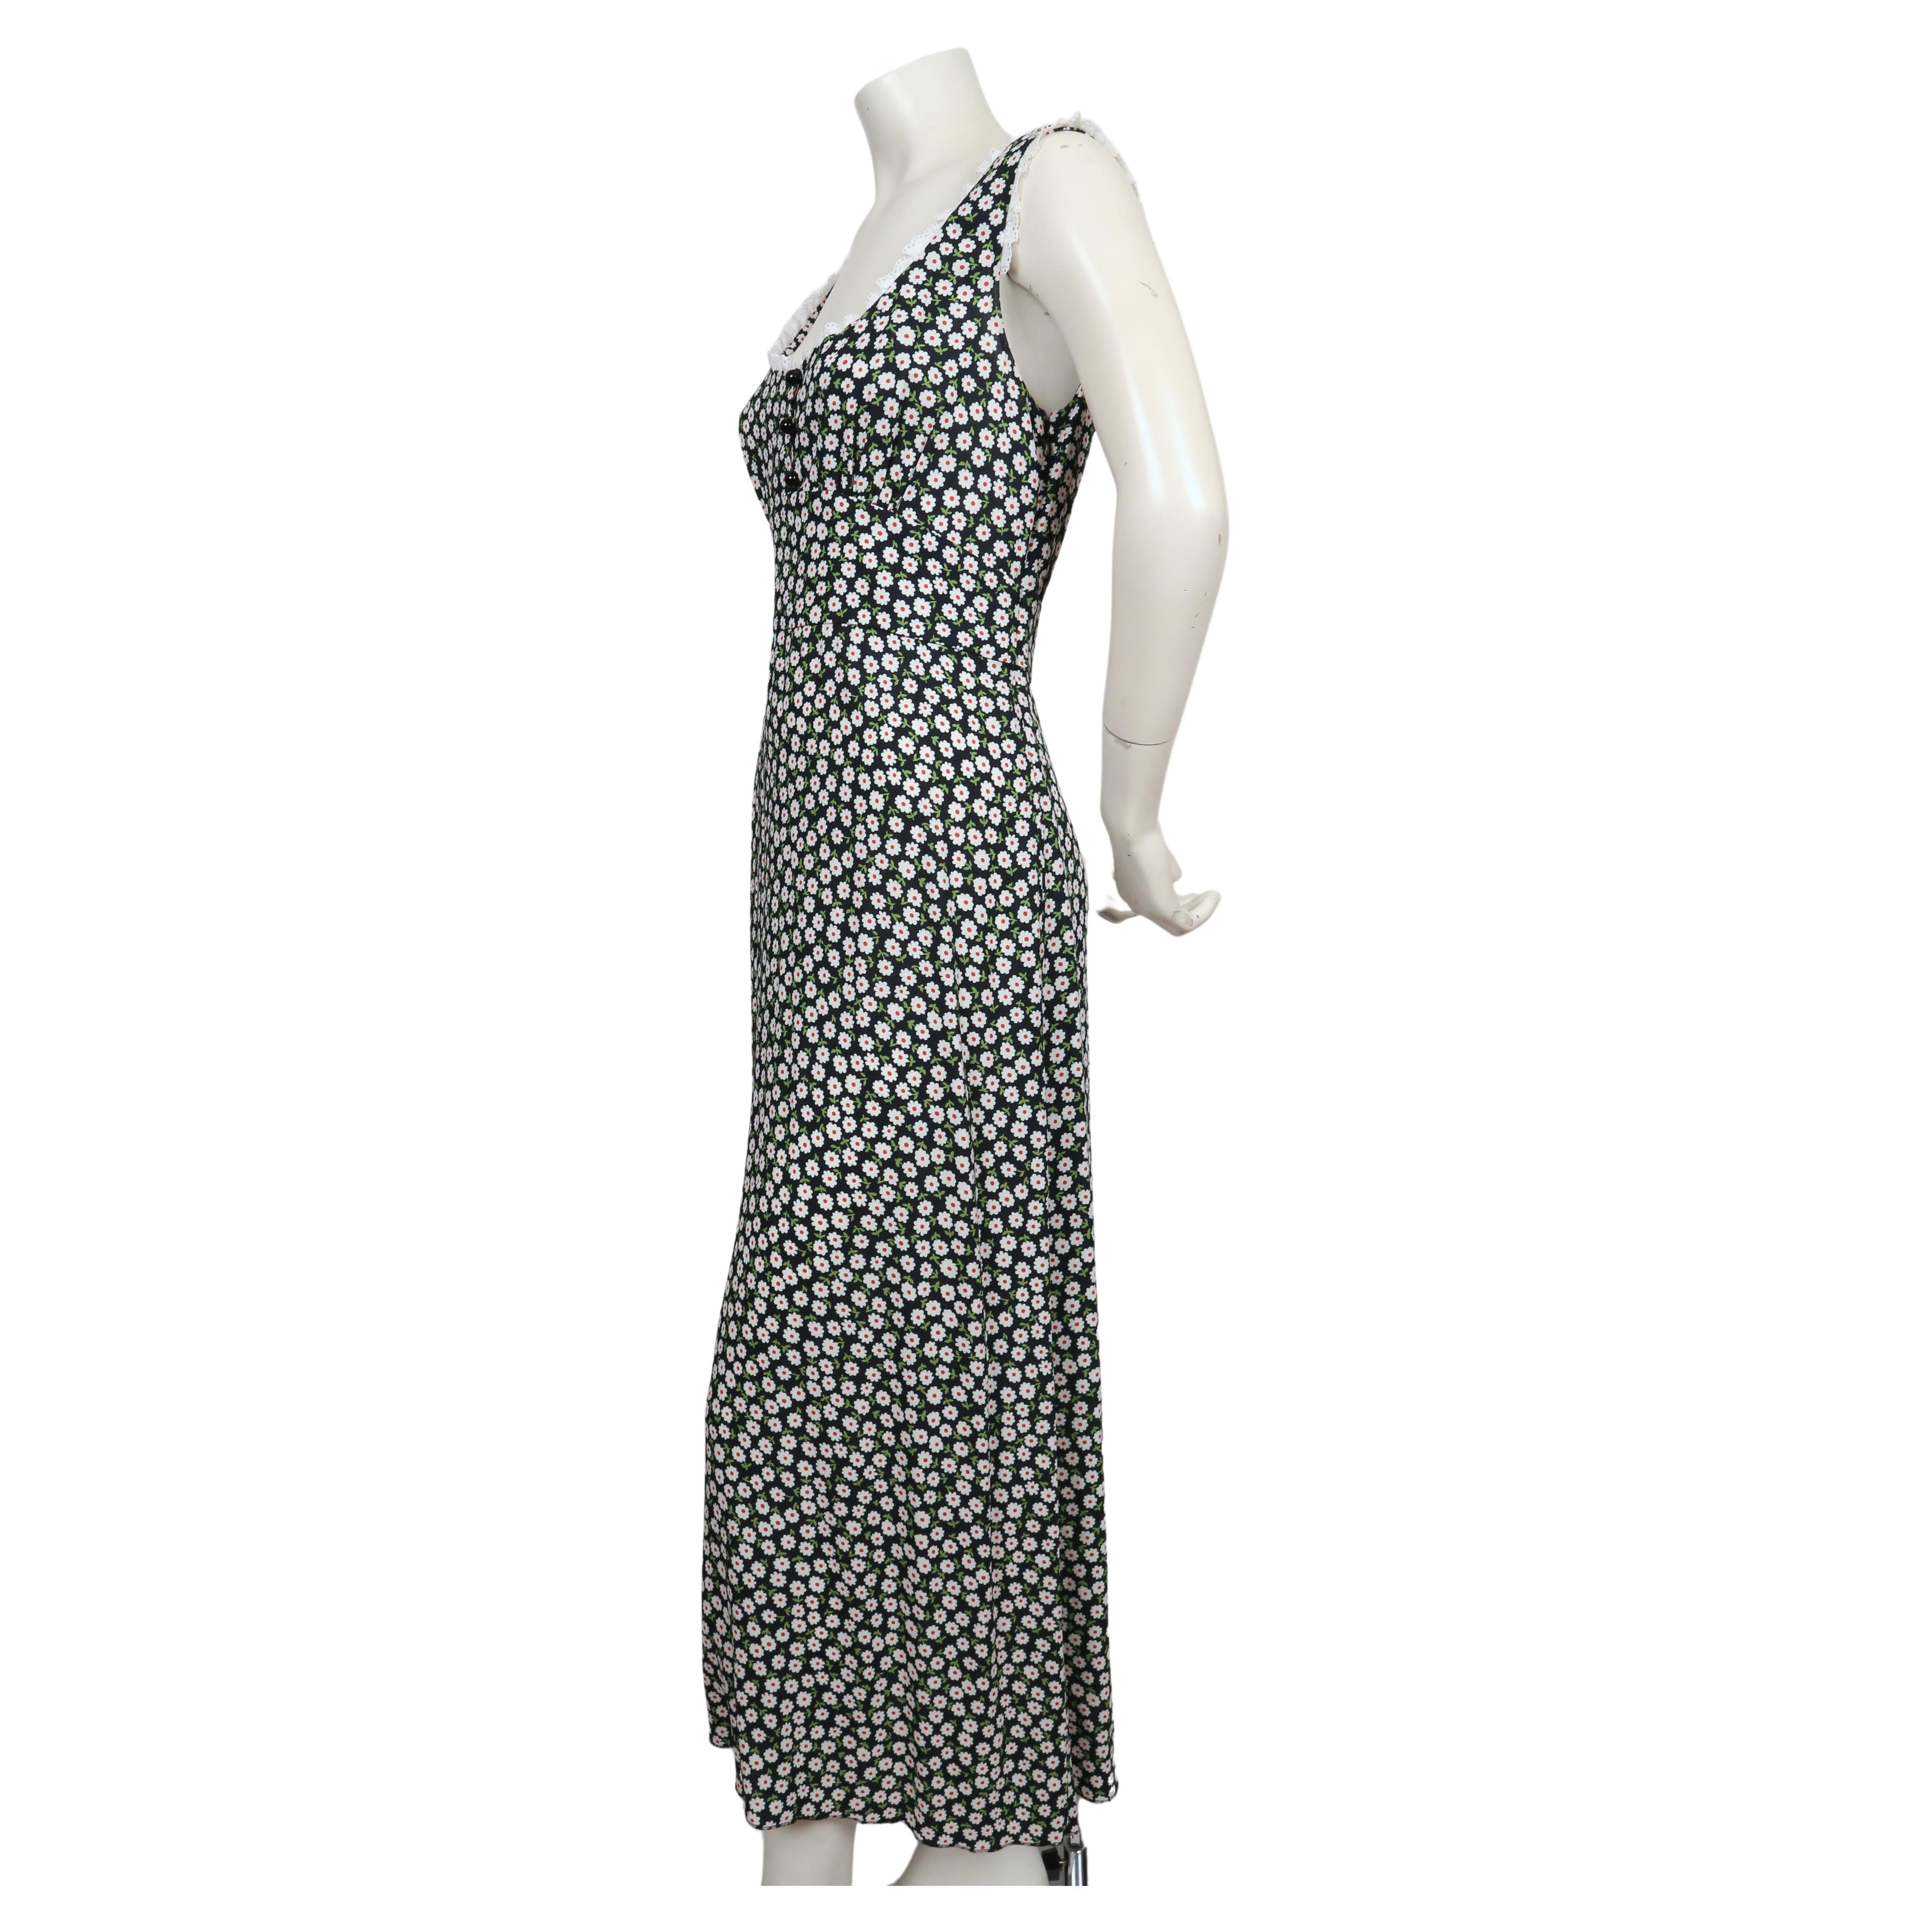 Women's or Men's MIU MIU floral maxi dress with Broderie Anglaise lace trim For Sale